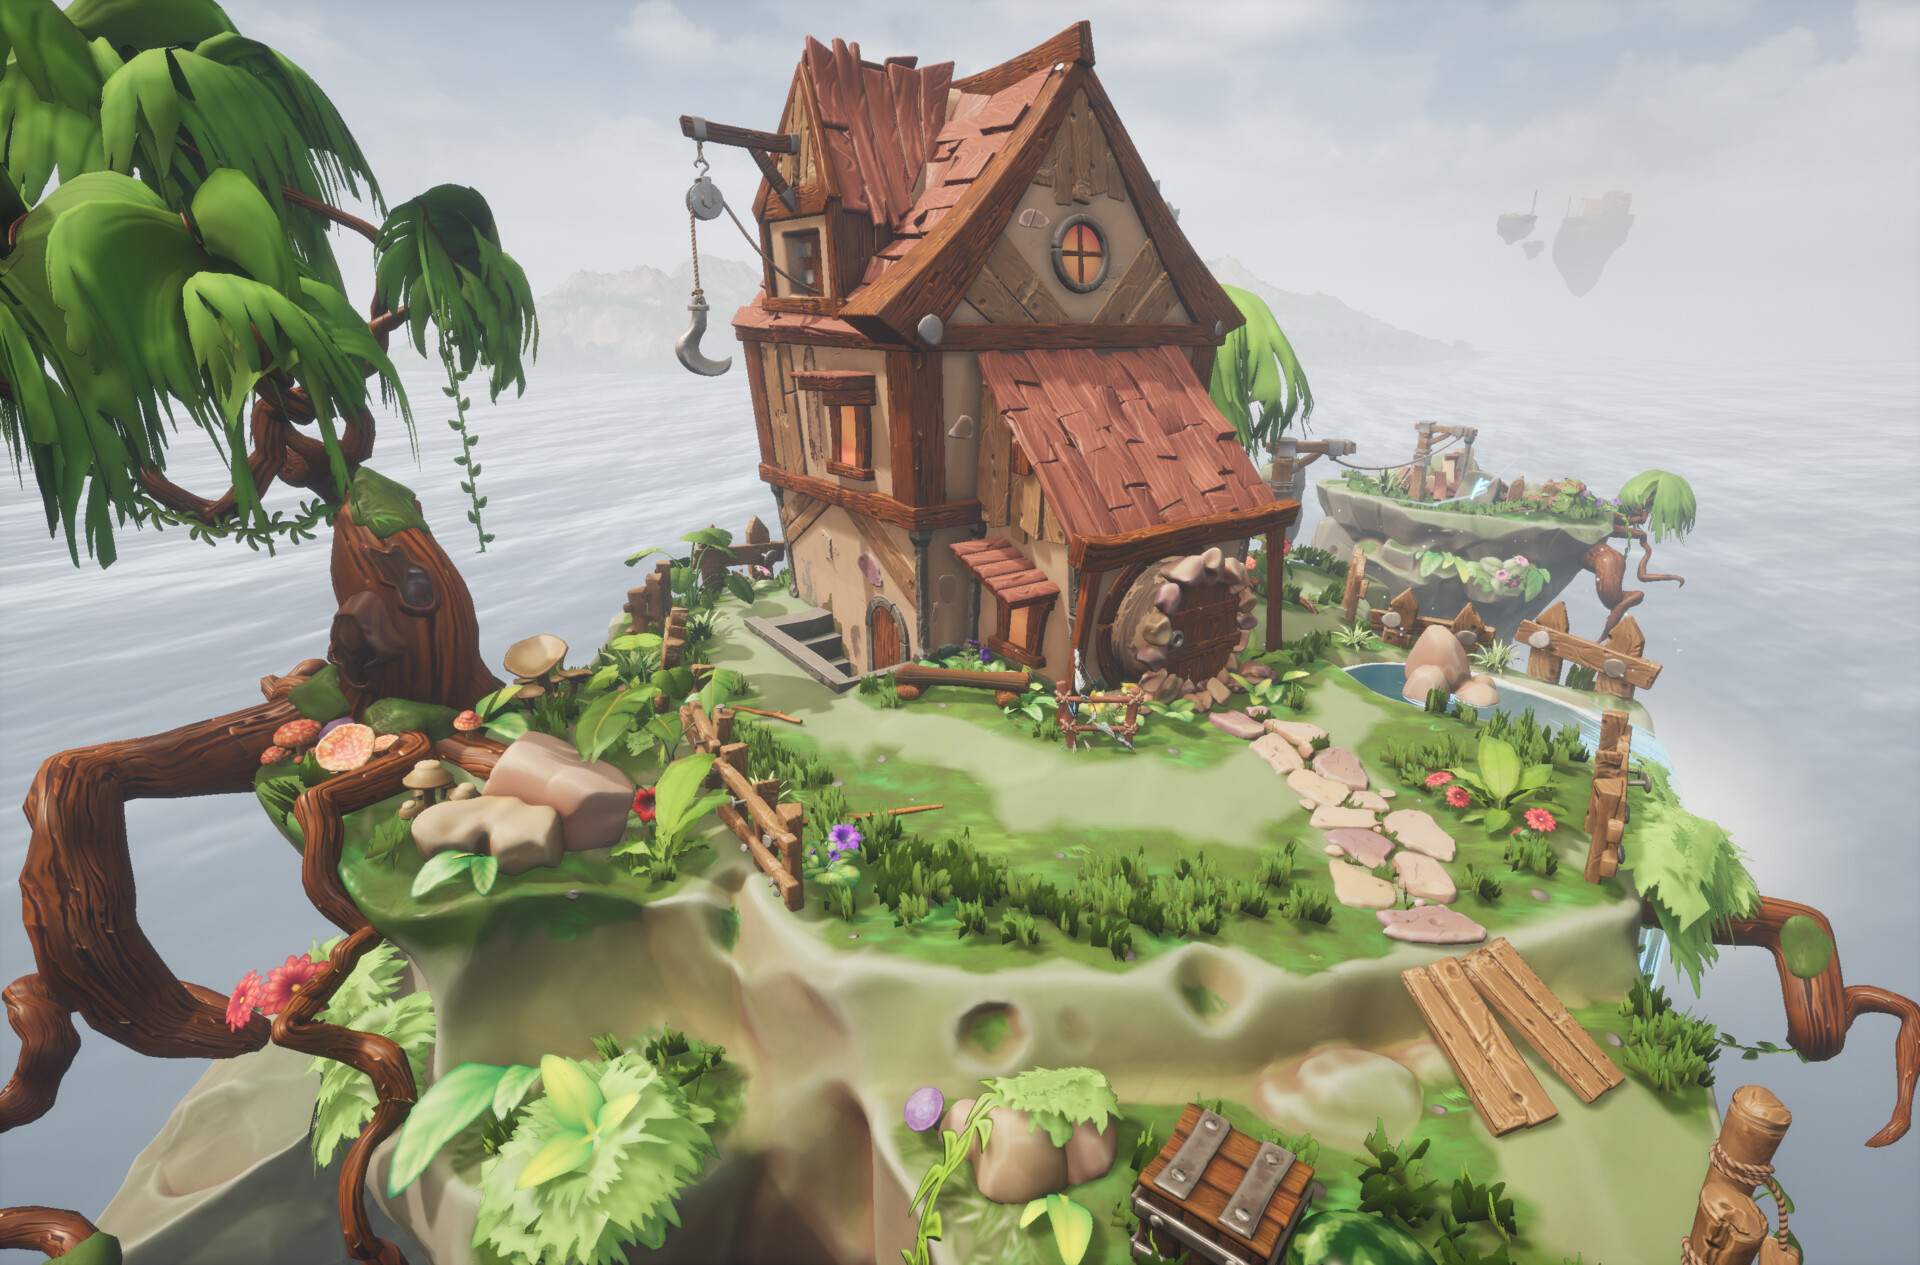 ArtStation - Stylized Environment - lodge on mysterious soaring islands